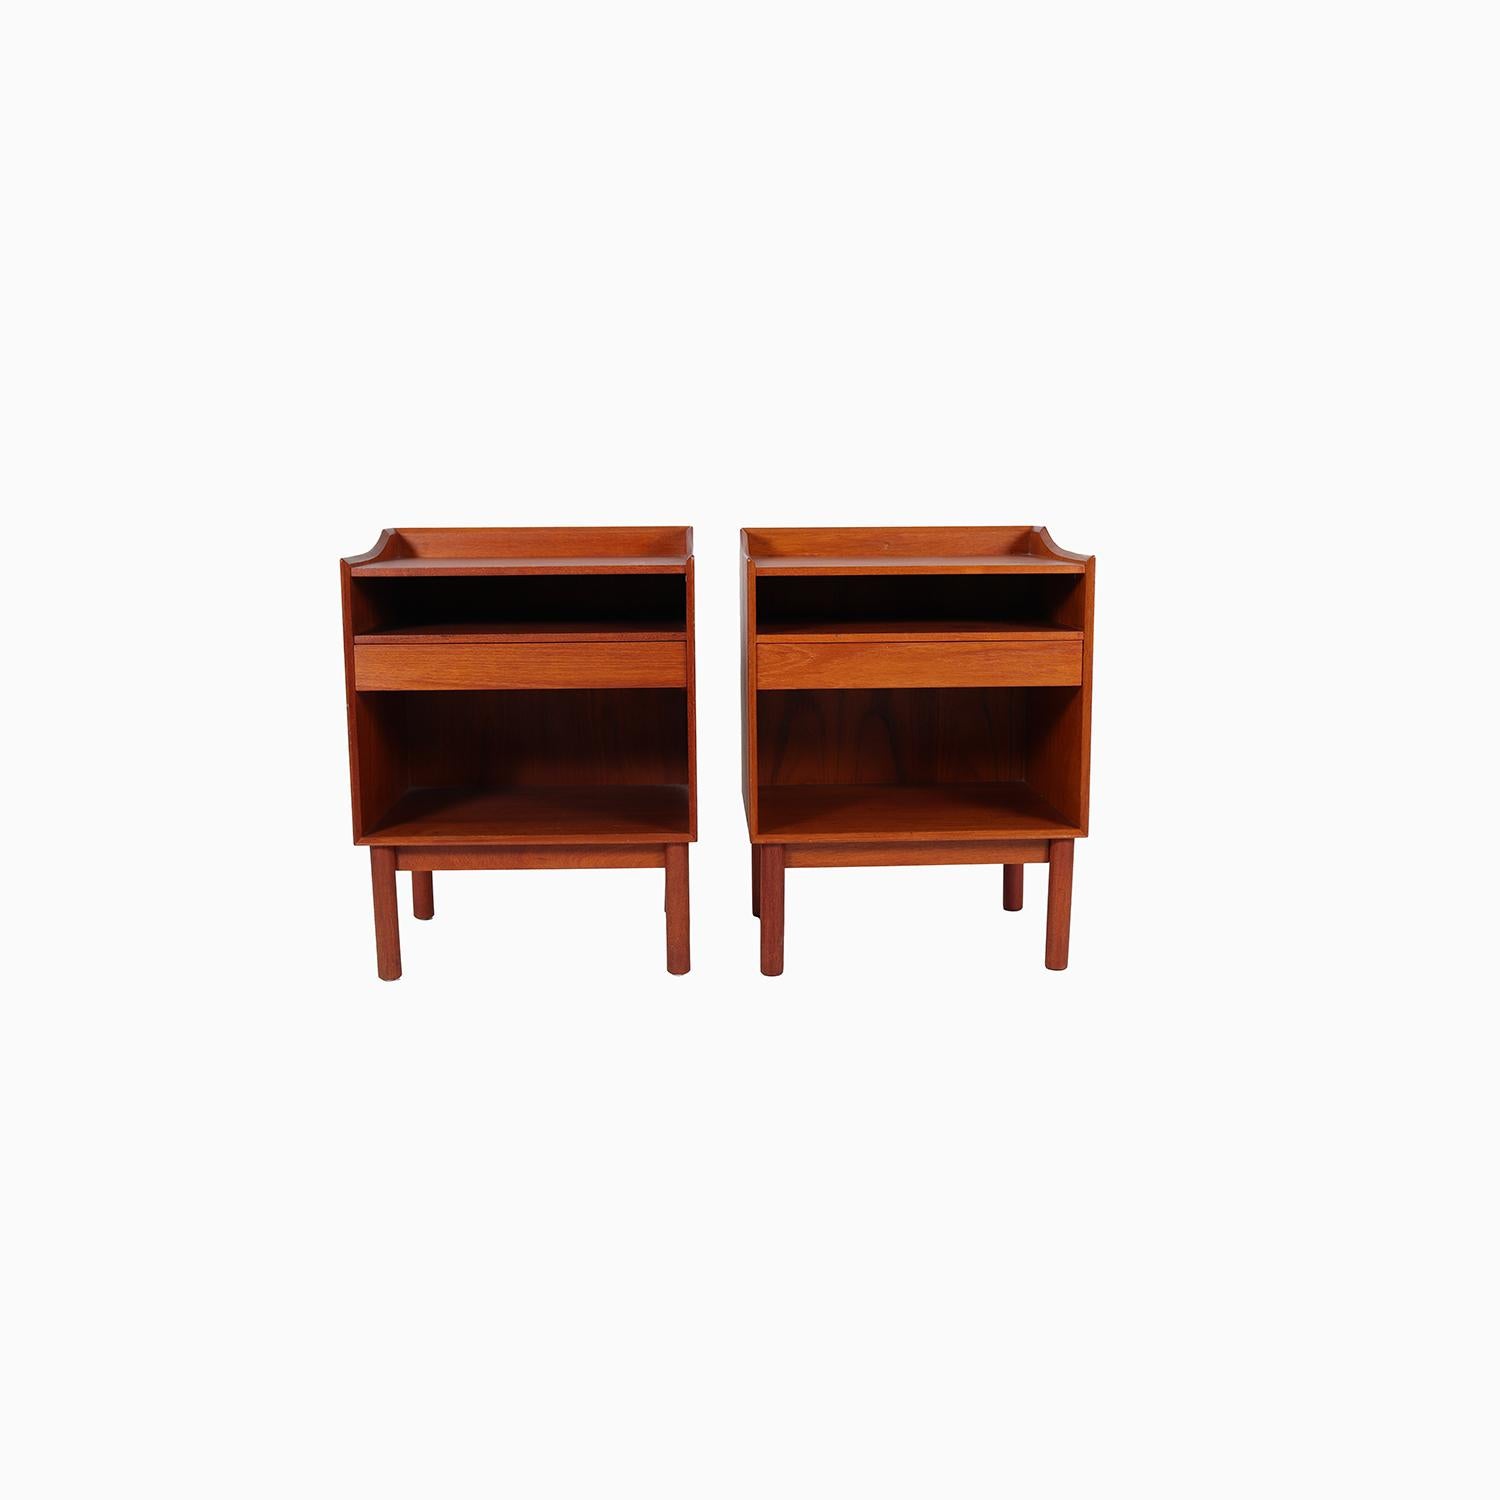 A lovely pair of nightstands designed by Hvidt & Molgaard-Nielsen. Solid teak construction with exposed joinery. A useful design with open storage, single drawer and large space on top. Finished on all sides. 

Professional, skilled furniture